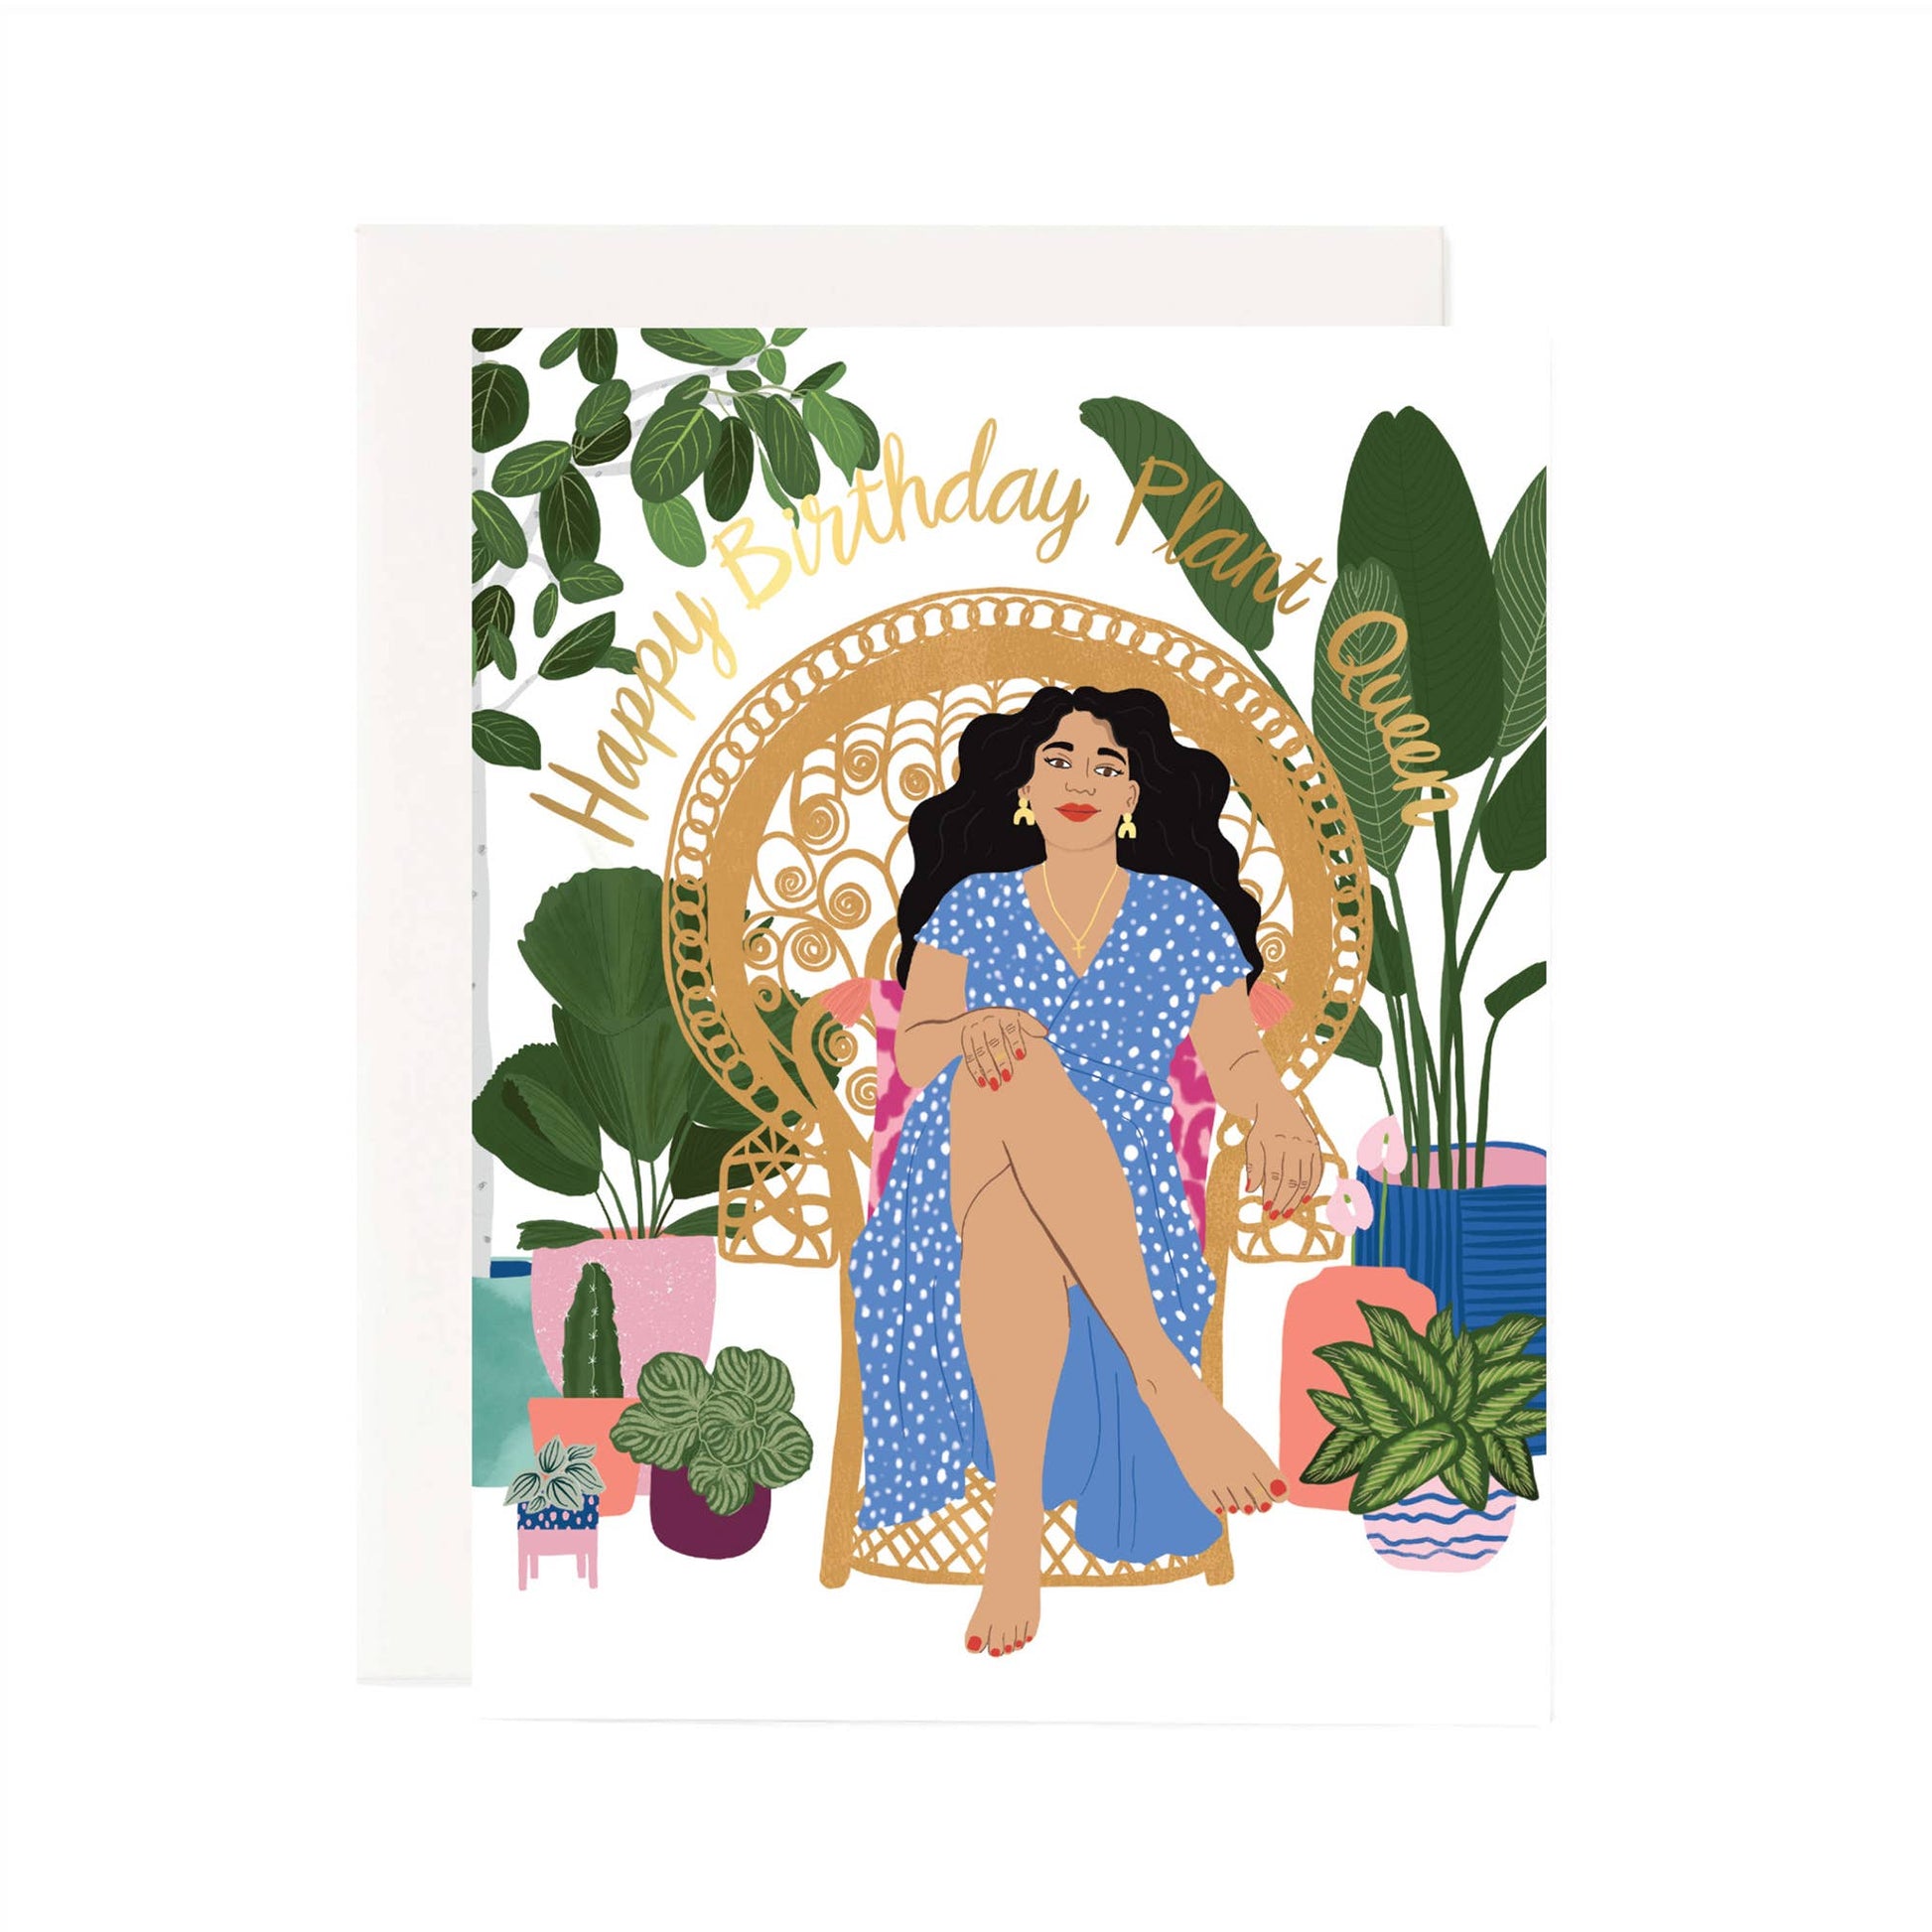 "Happy birthday plant queen" featuring a drawing of stylish woman of color with long black hair sitting on a throne and surrounded by plants.